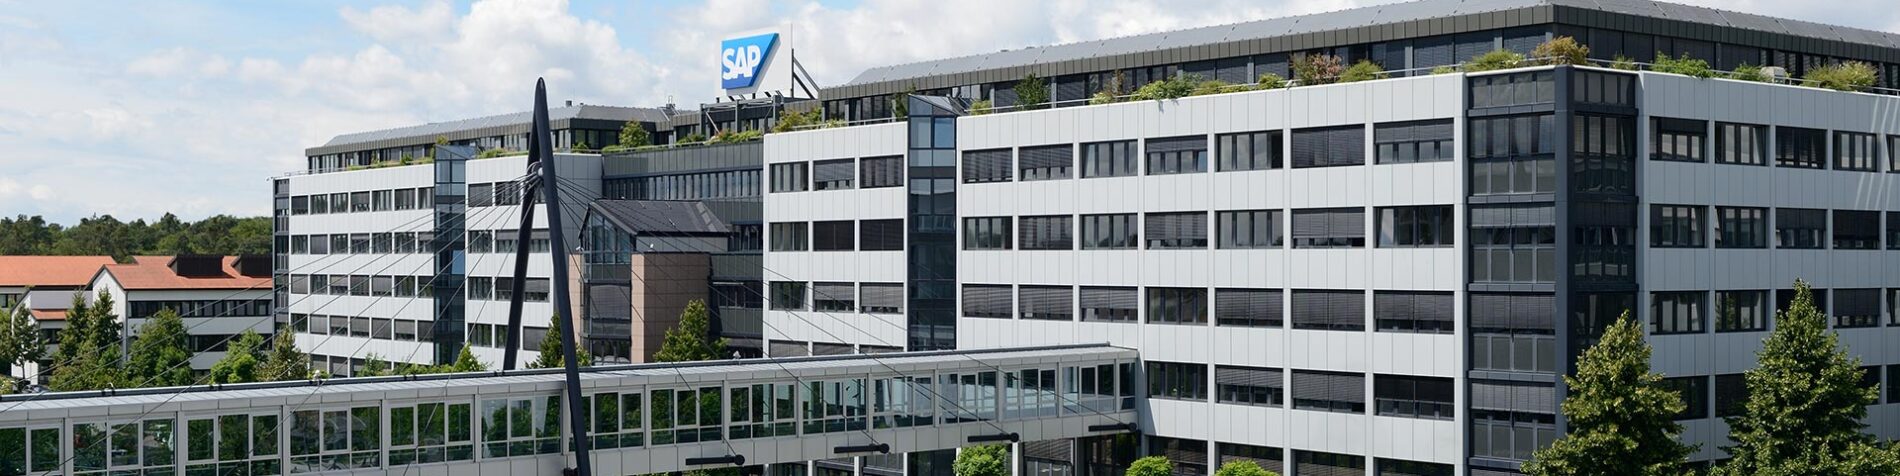 SAP Continues to Drive Transformation of the Company